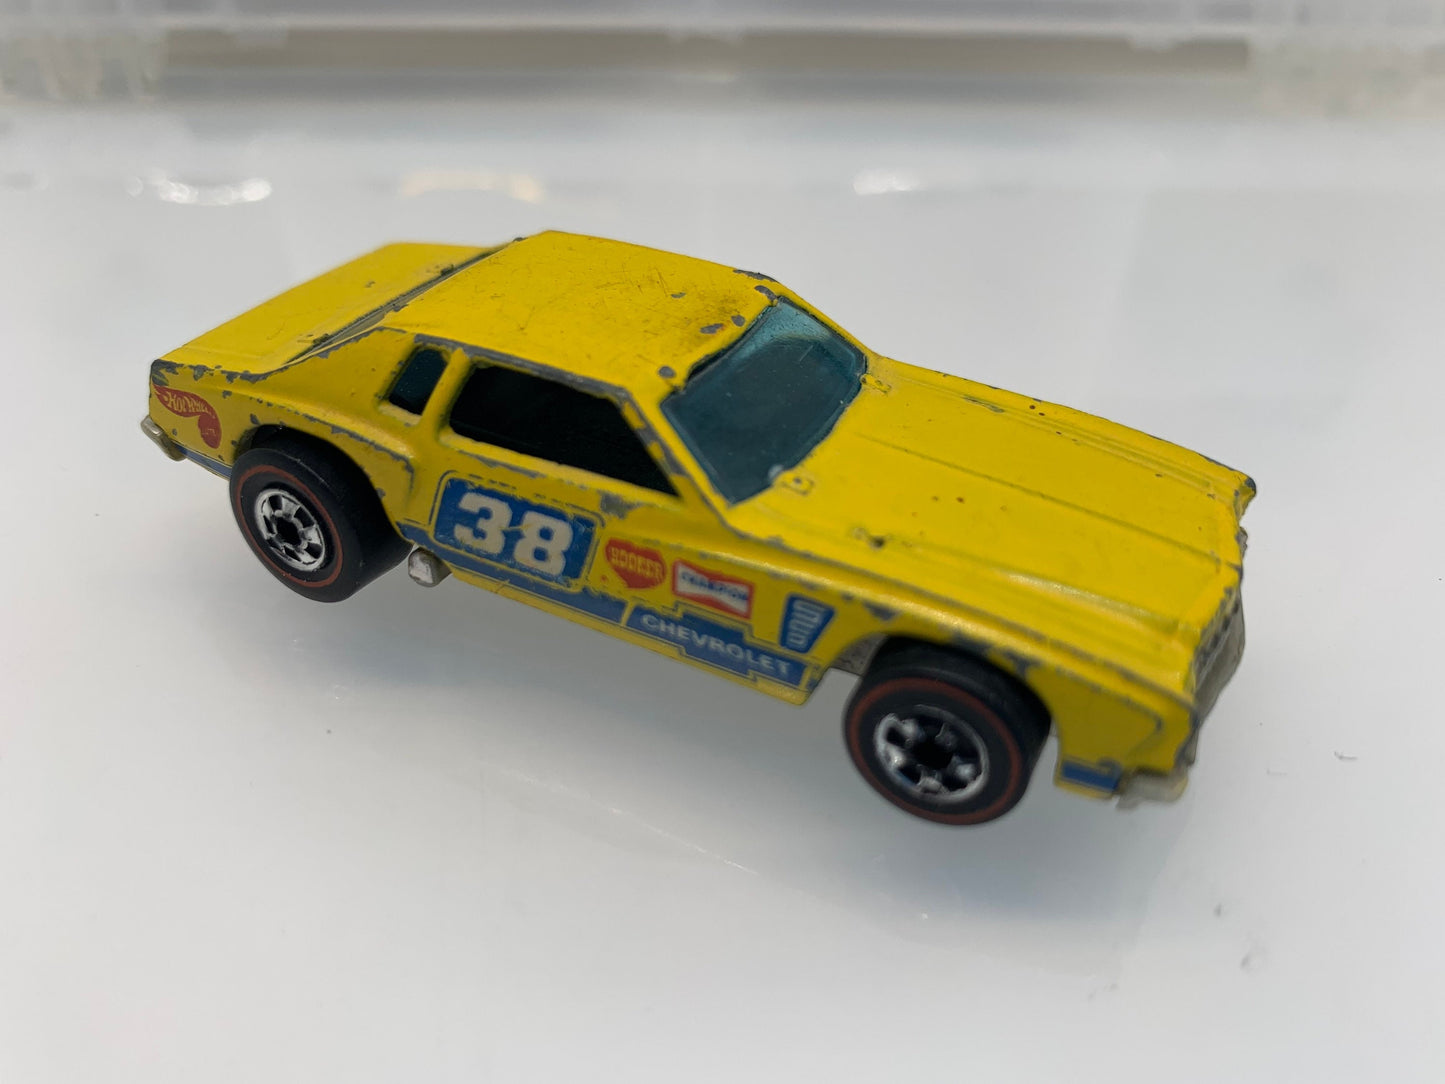 Hot Wheels Redline Monte Carlo Stocker Yellow - Vintage Diecast Metal Cars - Vintage Collectibles - 1970's Toy Cars - Perfect Birthday Gift